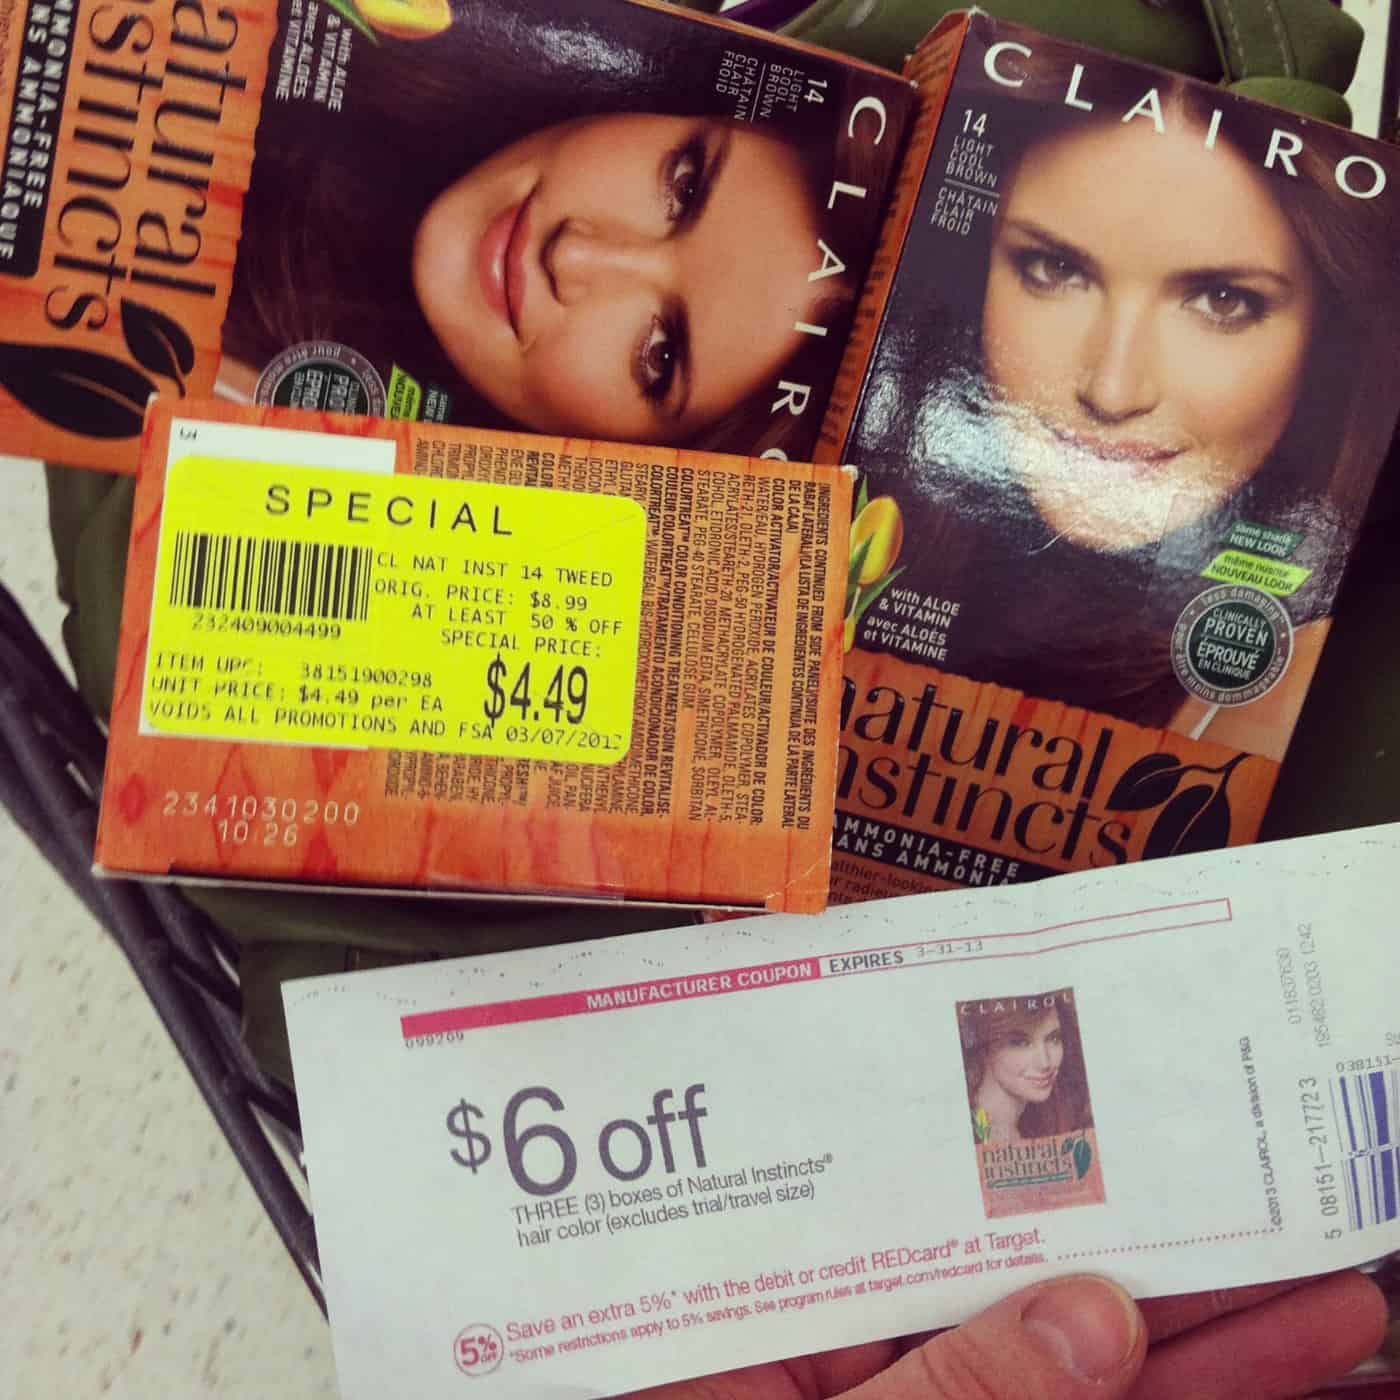 extreme couponing, hair coloring